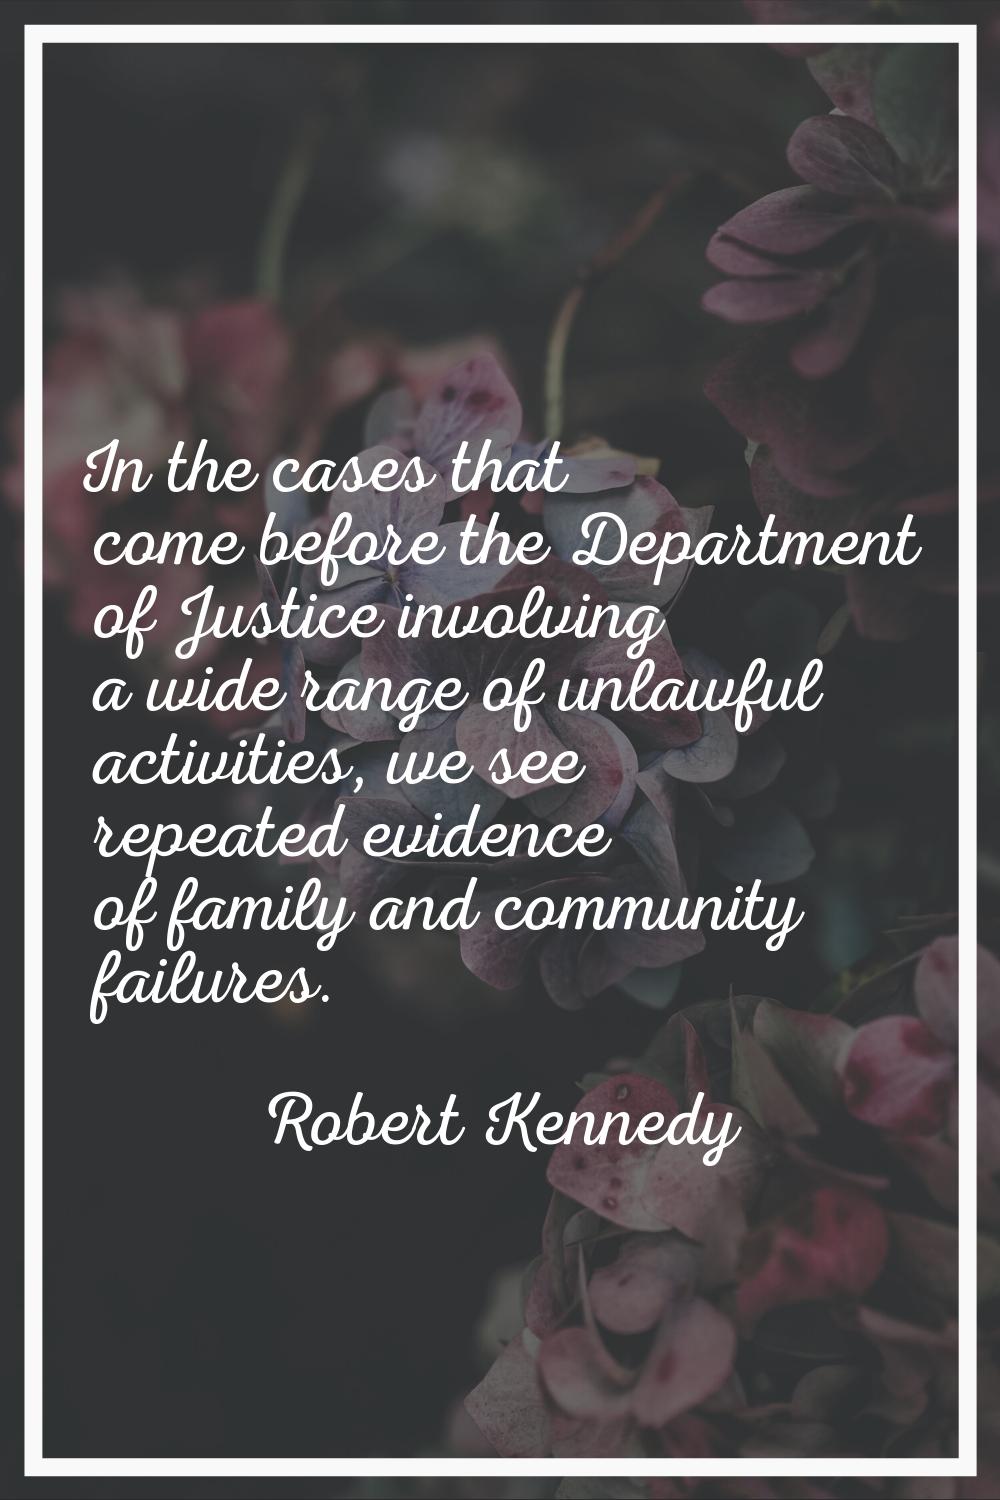 In the cases that come before the Department of Justice involving a wide range of unlawful activiti